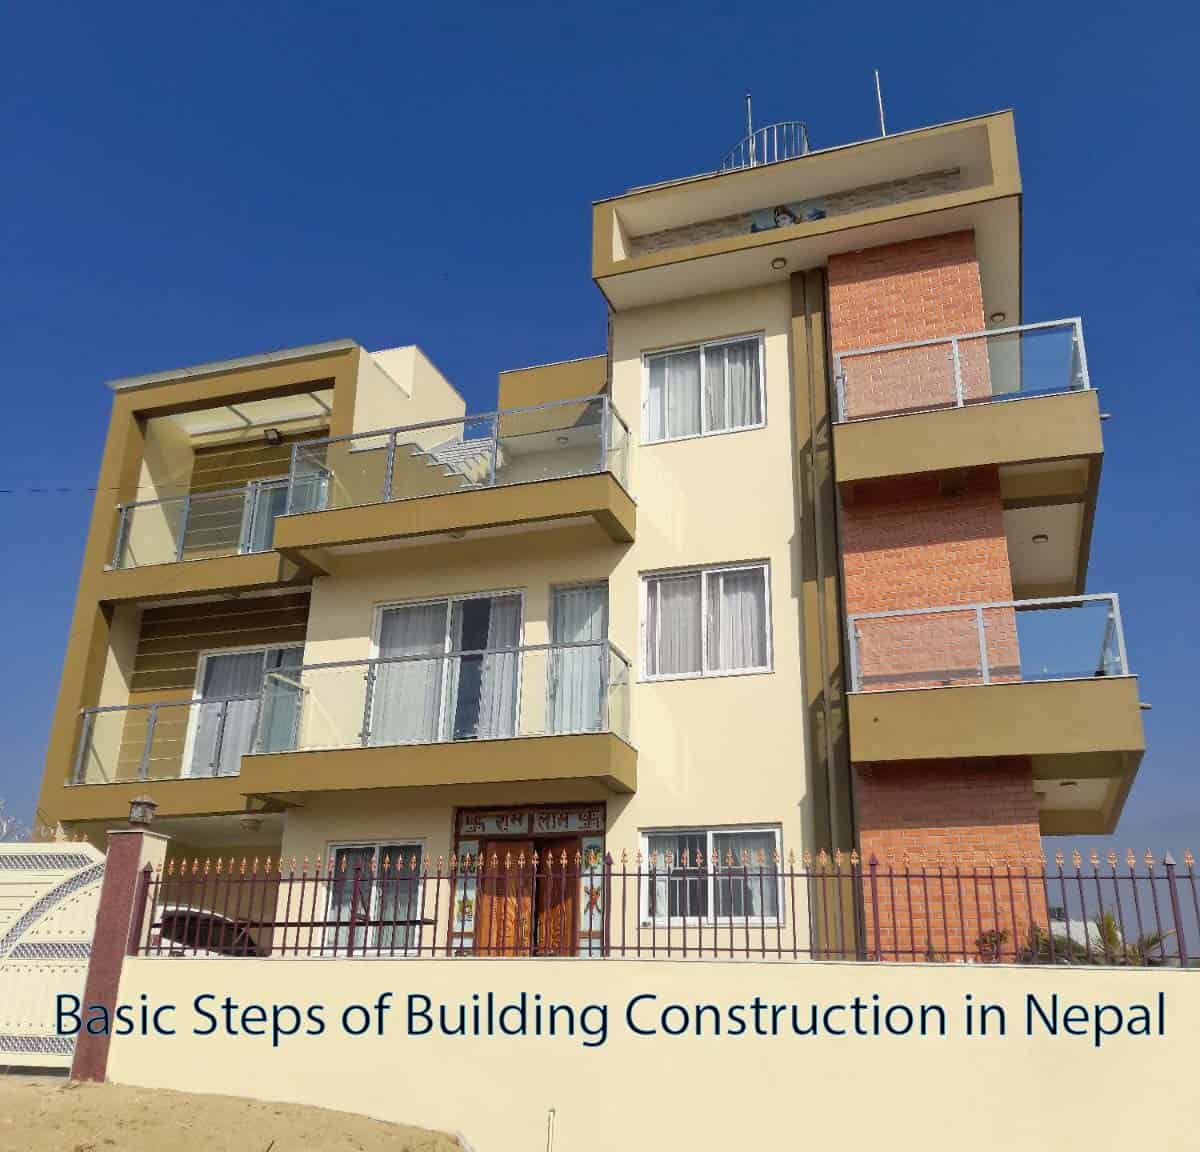 Basic Steps of Building Construction in Nepal